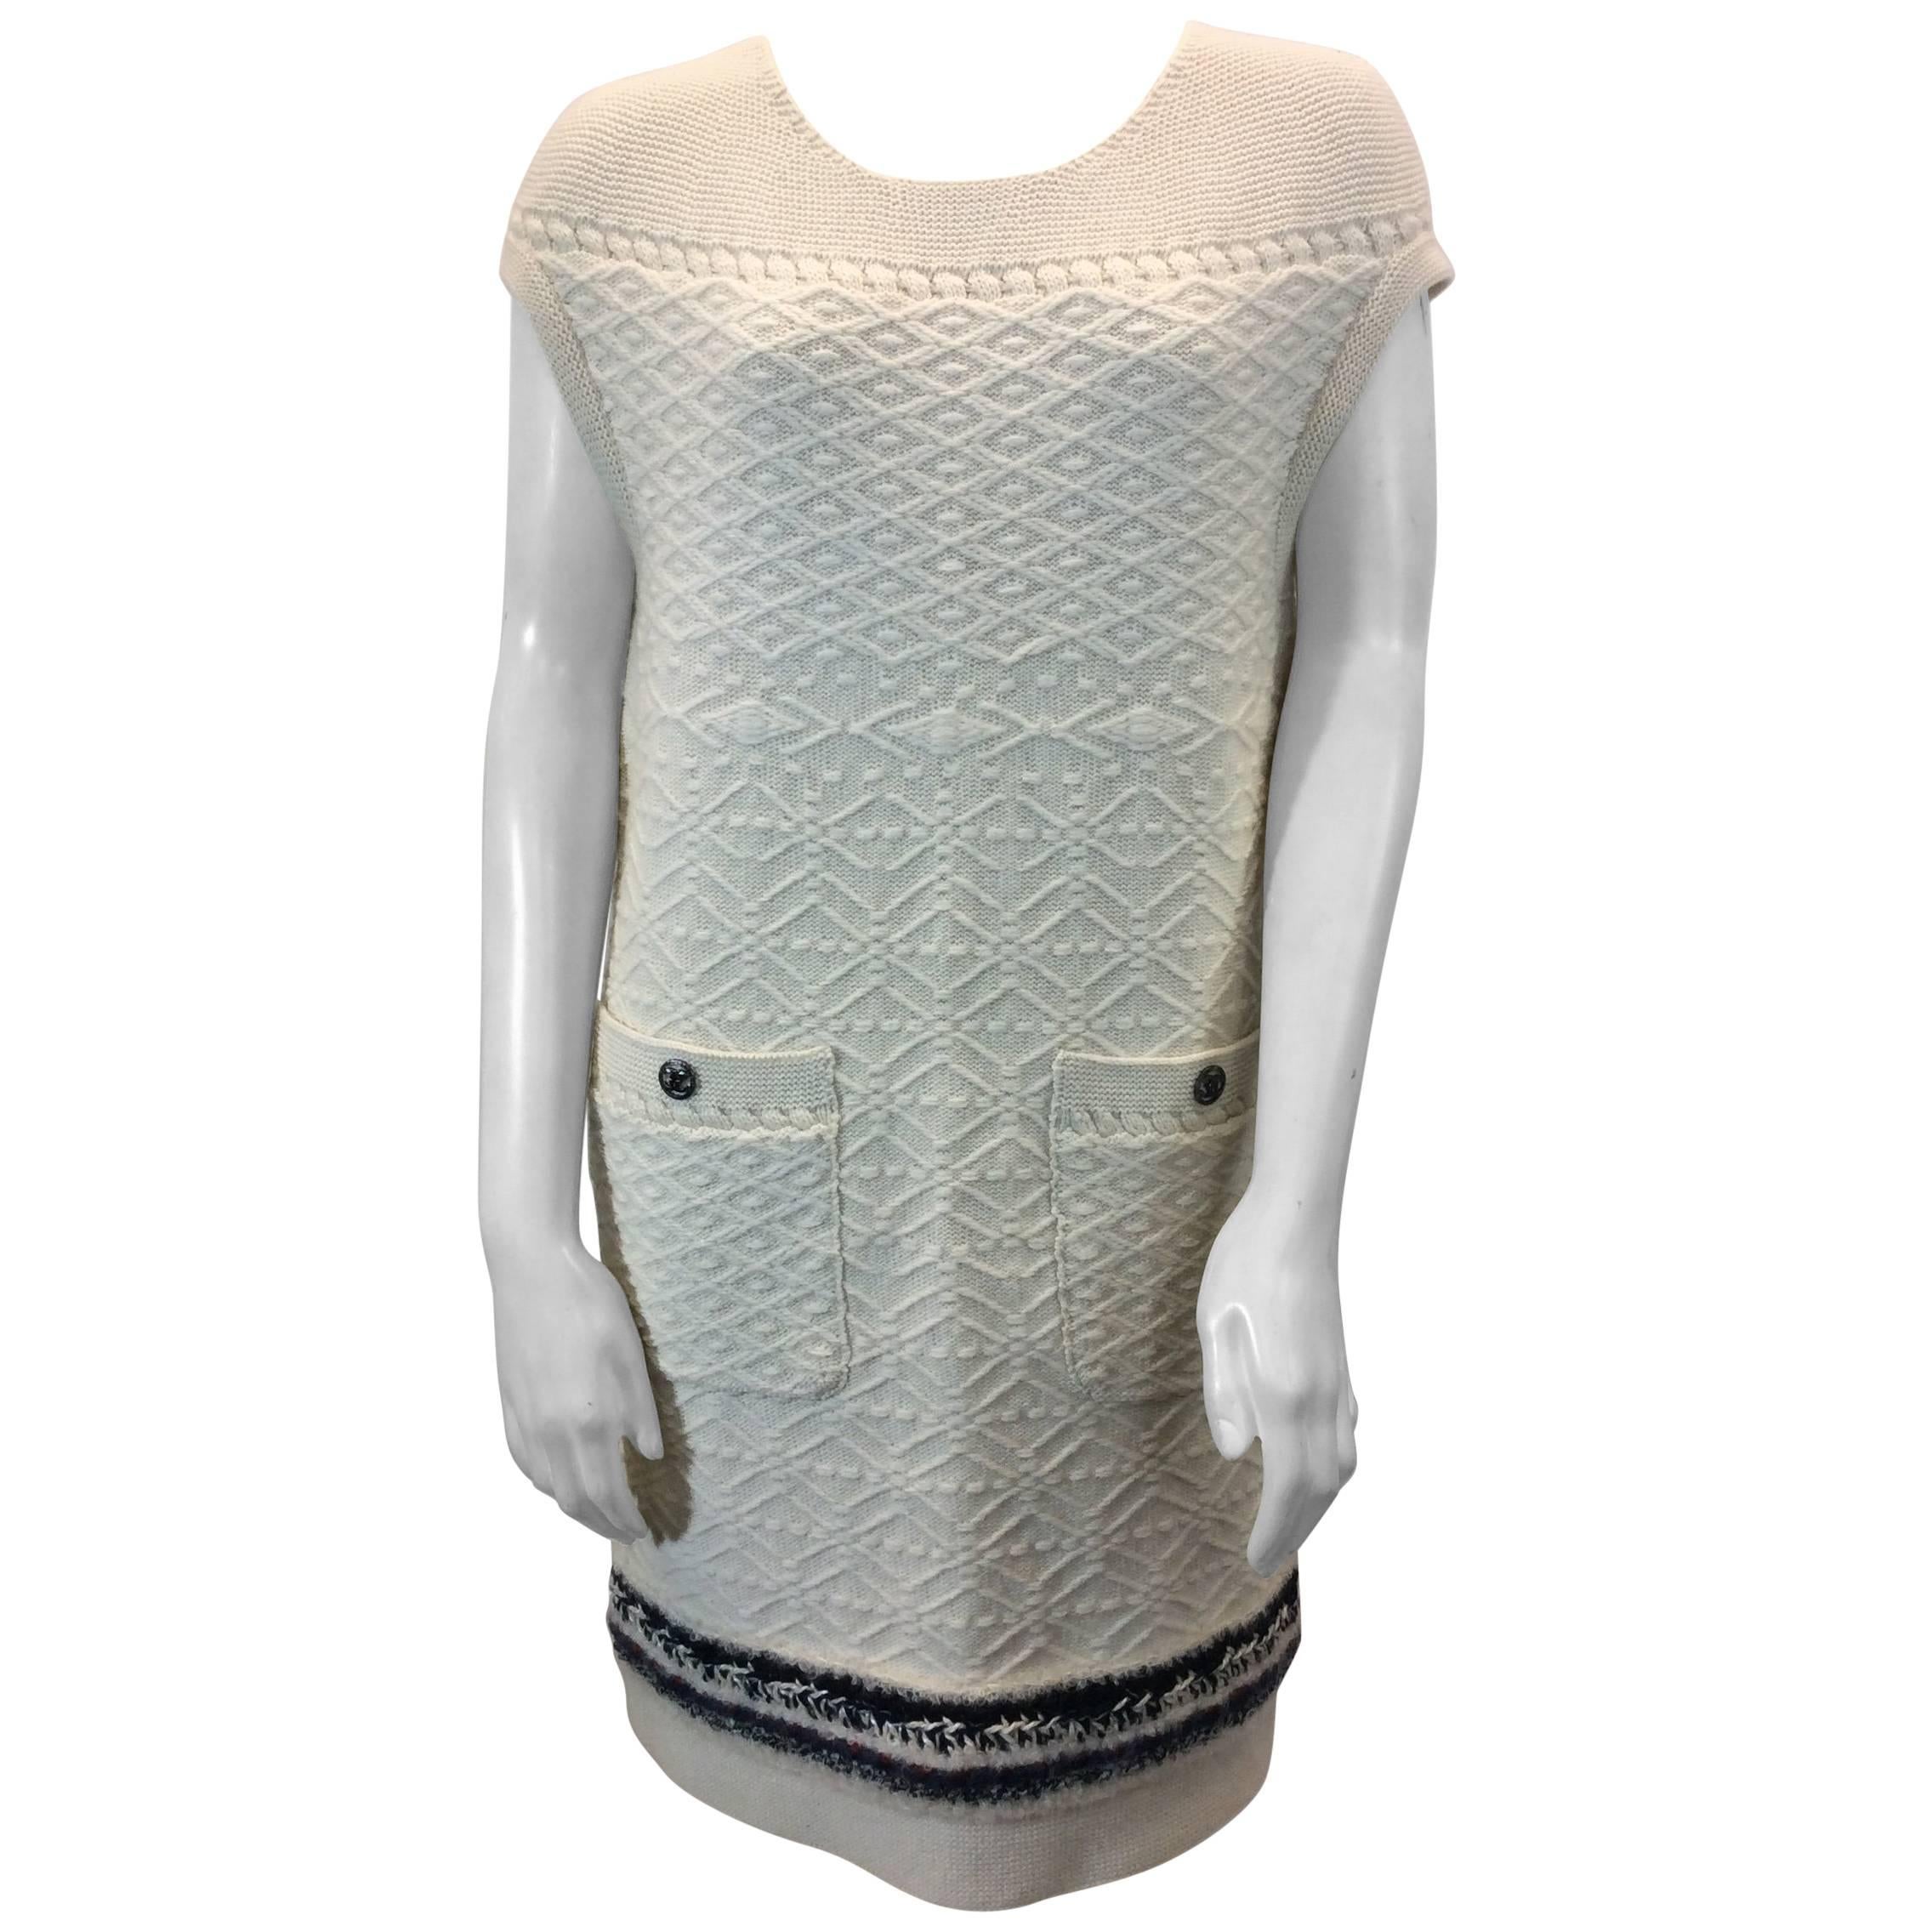 Chanel White Cashmere Knit Dress For Sale